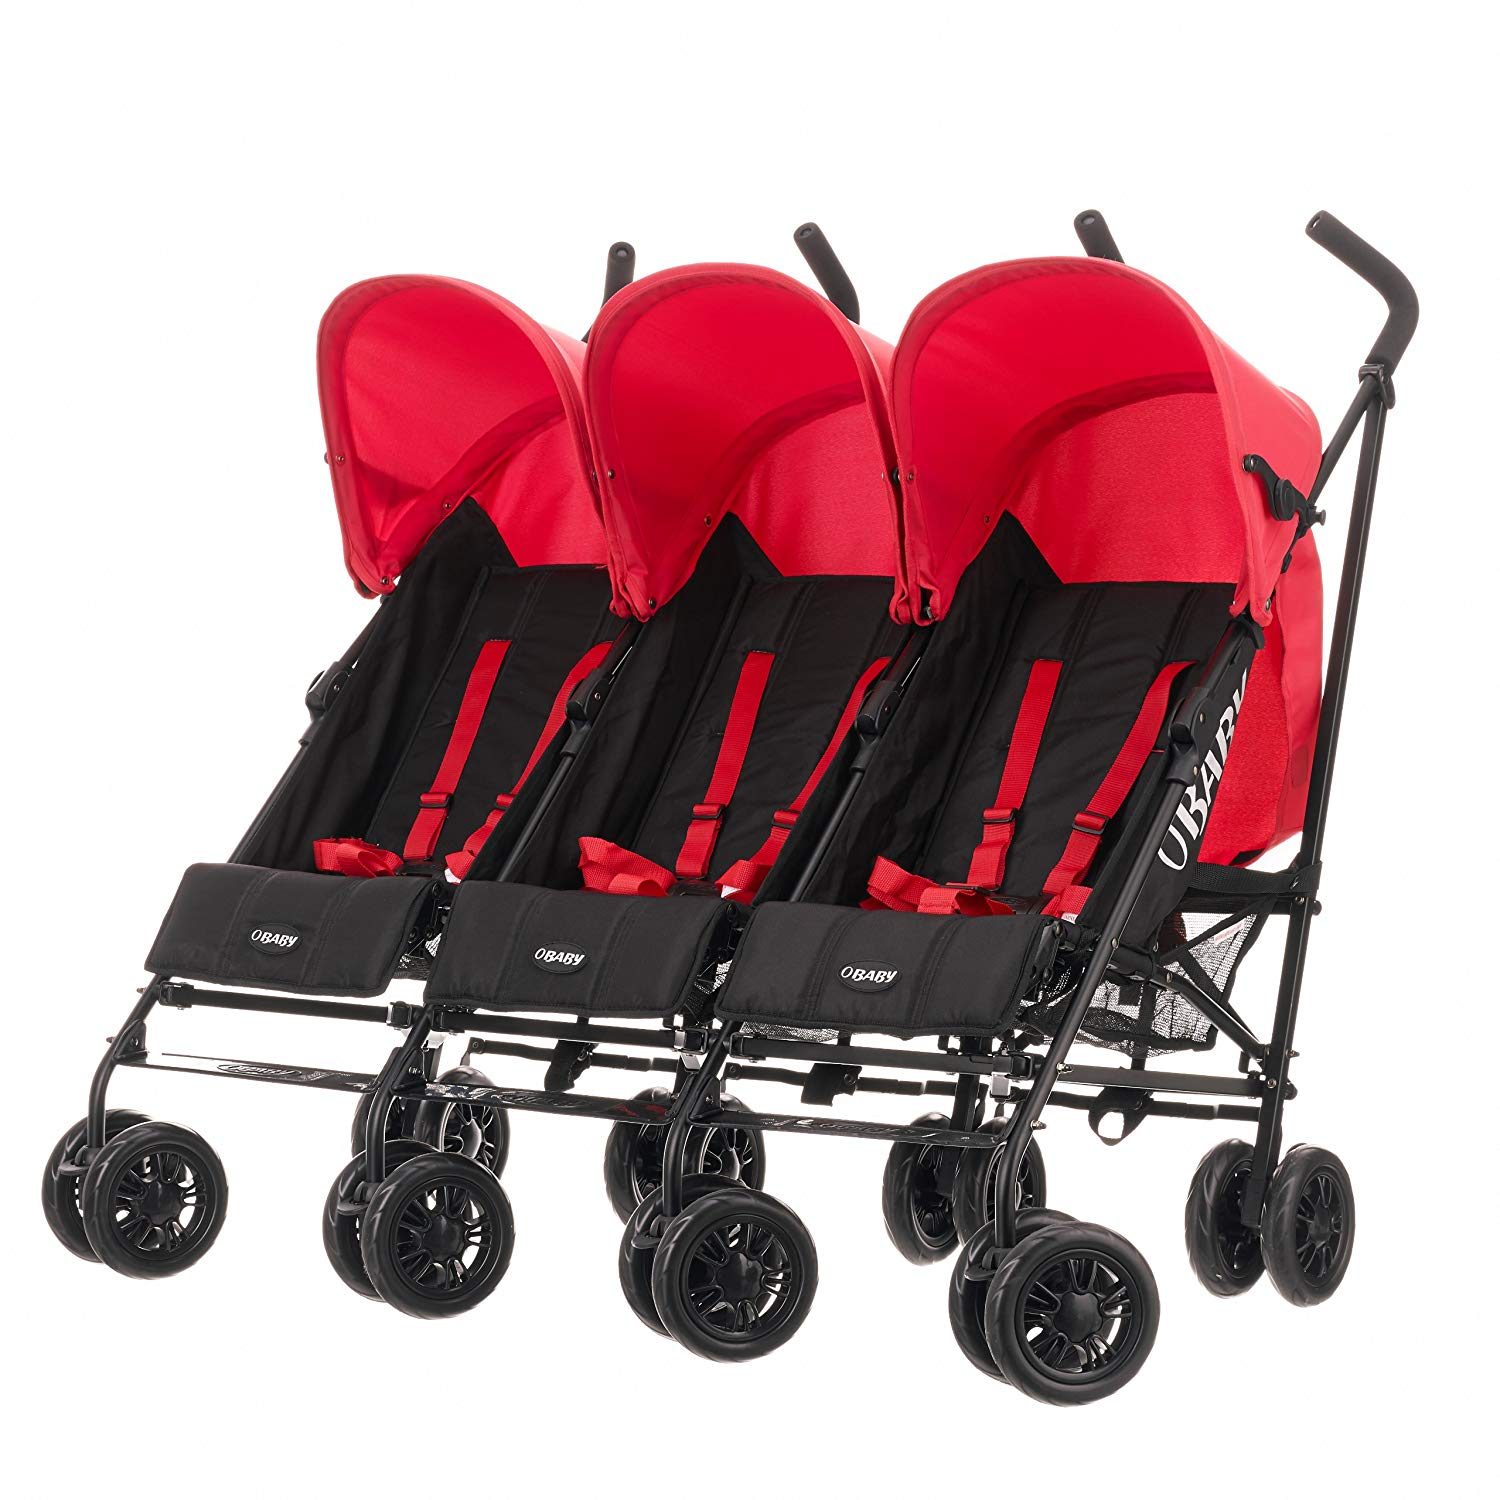  Image of a baby pram / stroller designed to hold three children side‐by‐side.